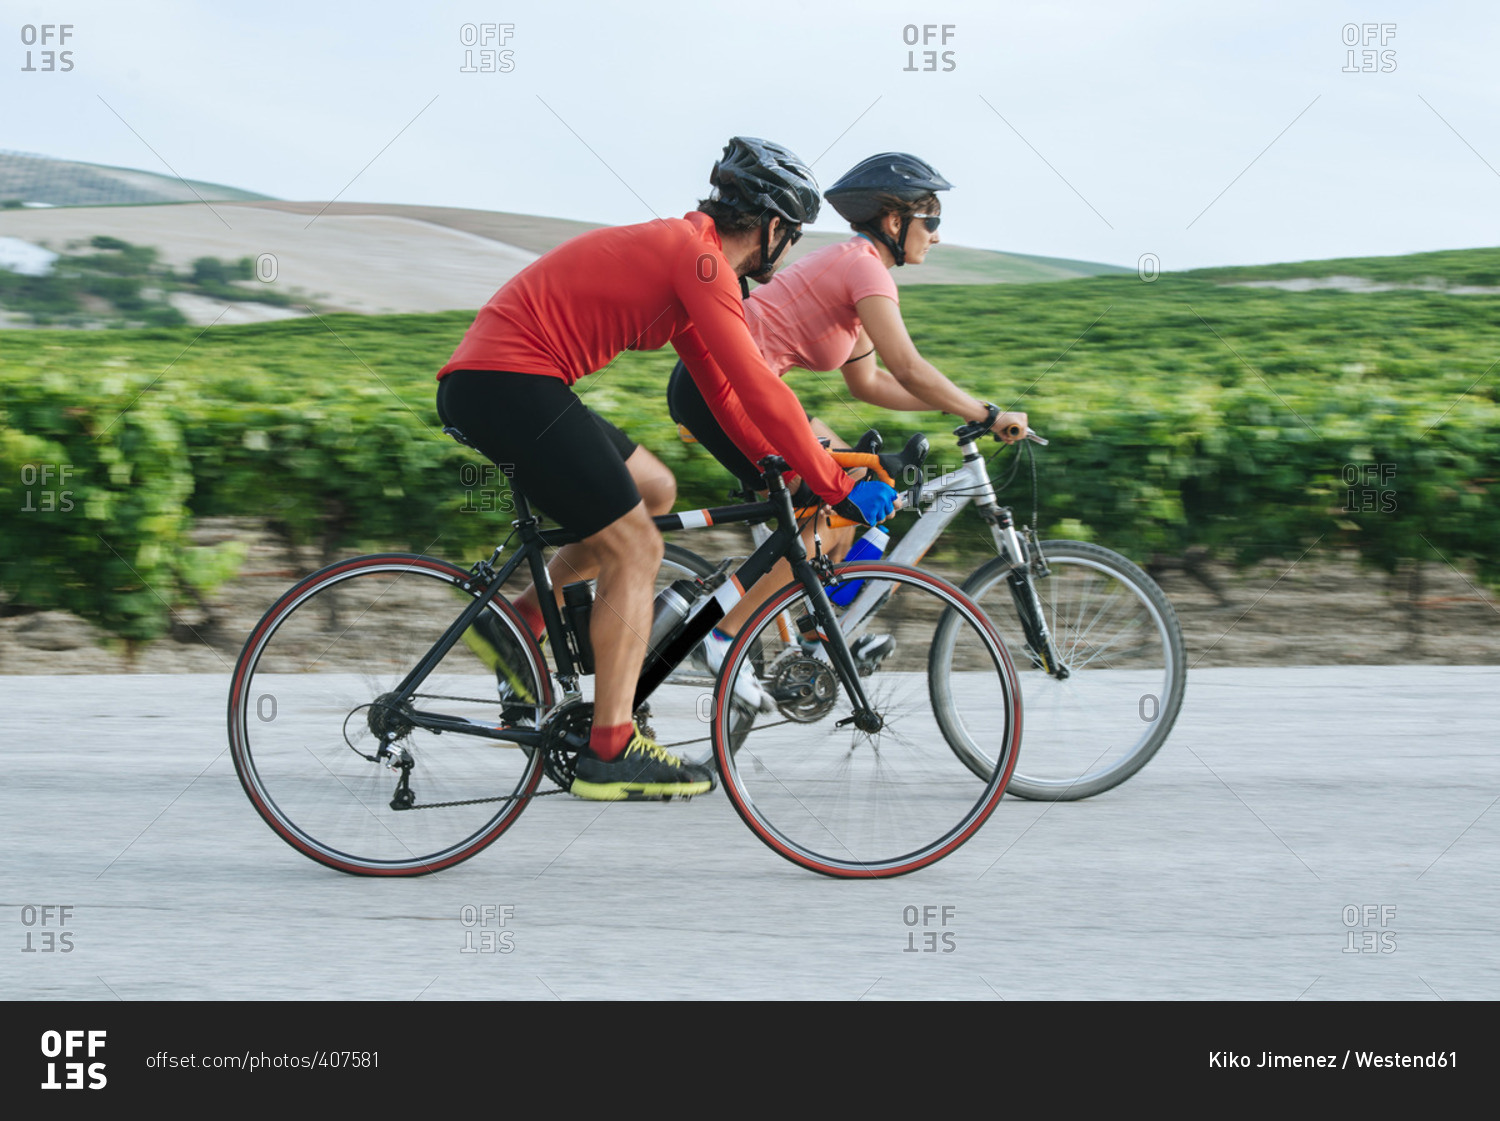 Spain- Andalusia- Jerez de la Frontera- Couple on bicycles on a road between vineyards